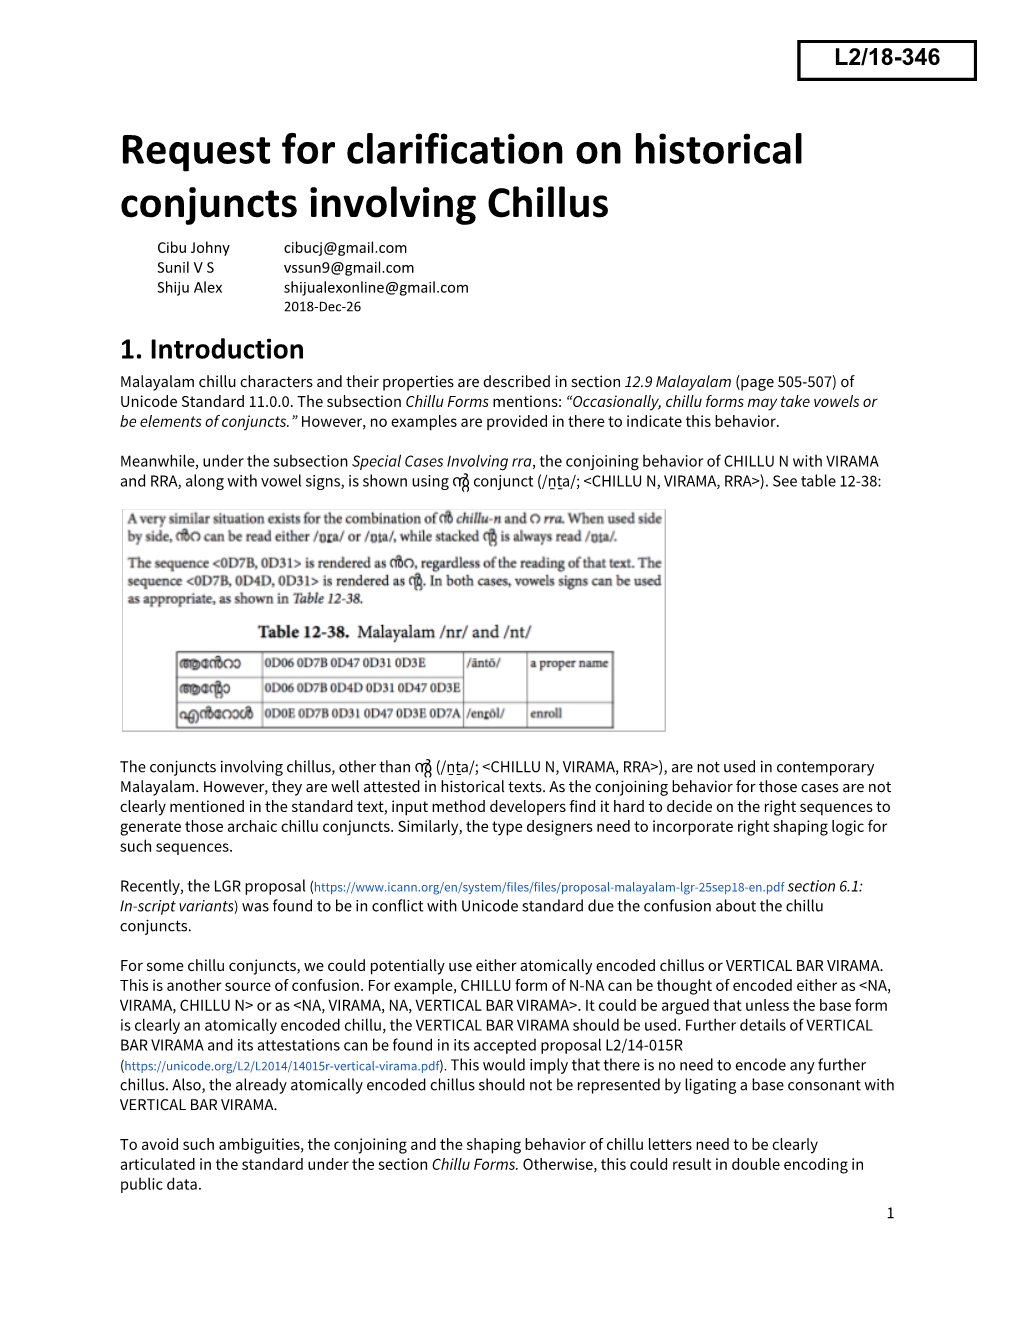 Request for Clarification on Historical Conjuncts Involving Chillus